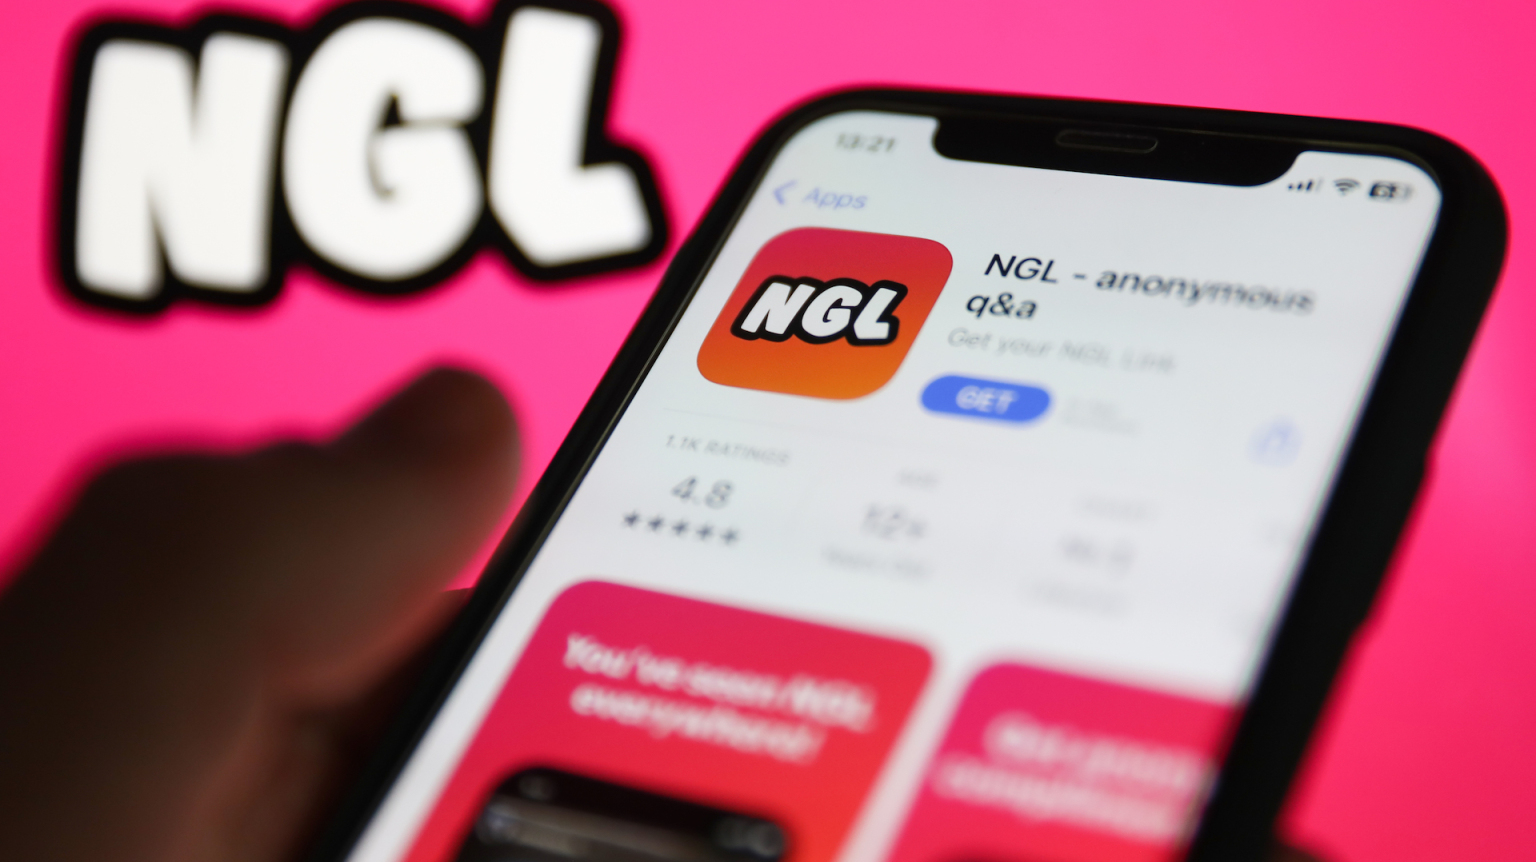 The NGL: ask me anything app logo in an app store.